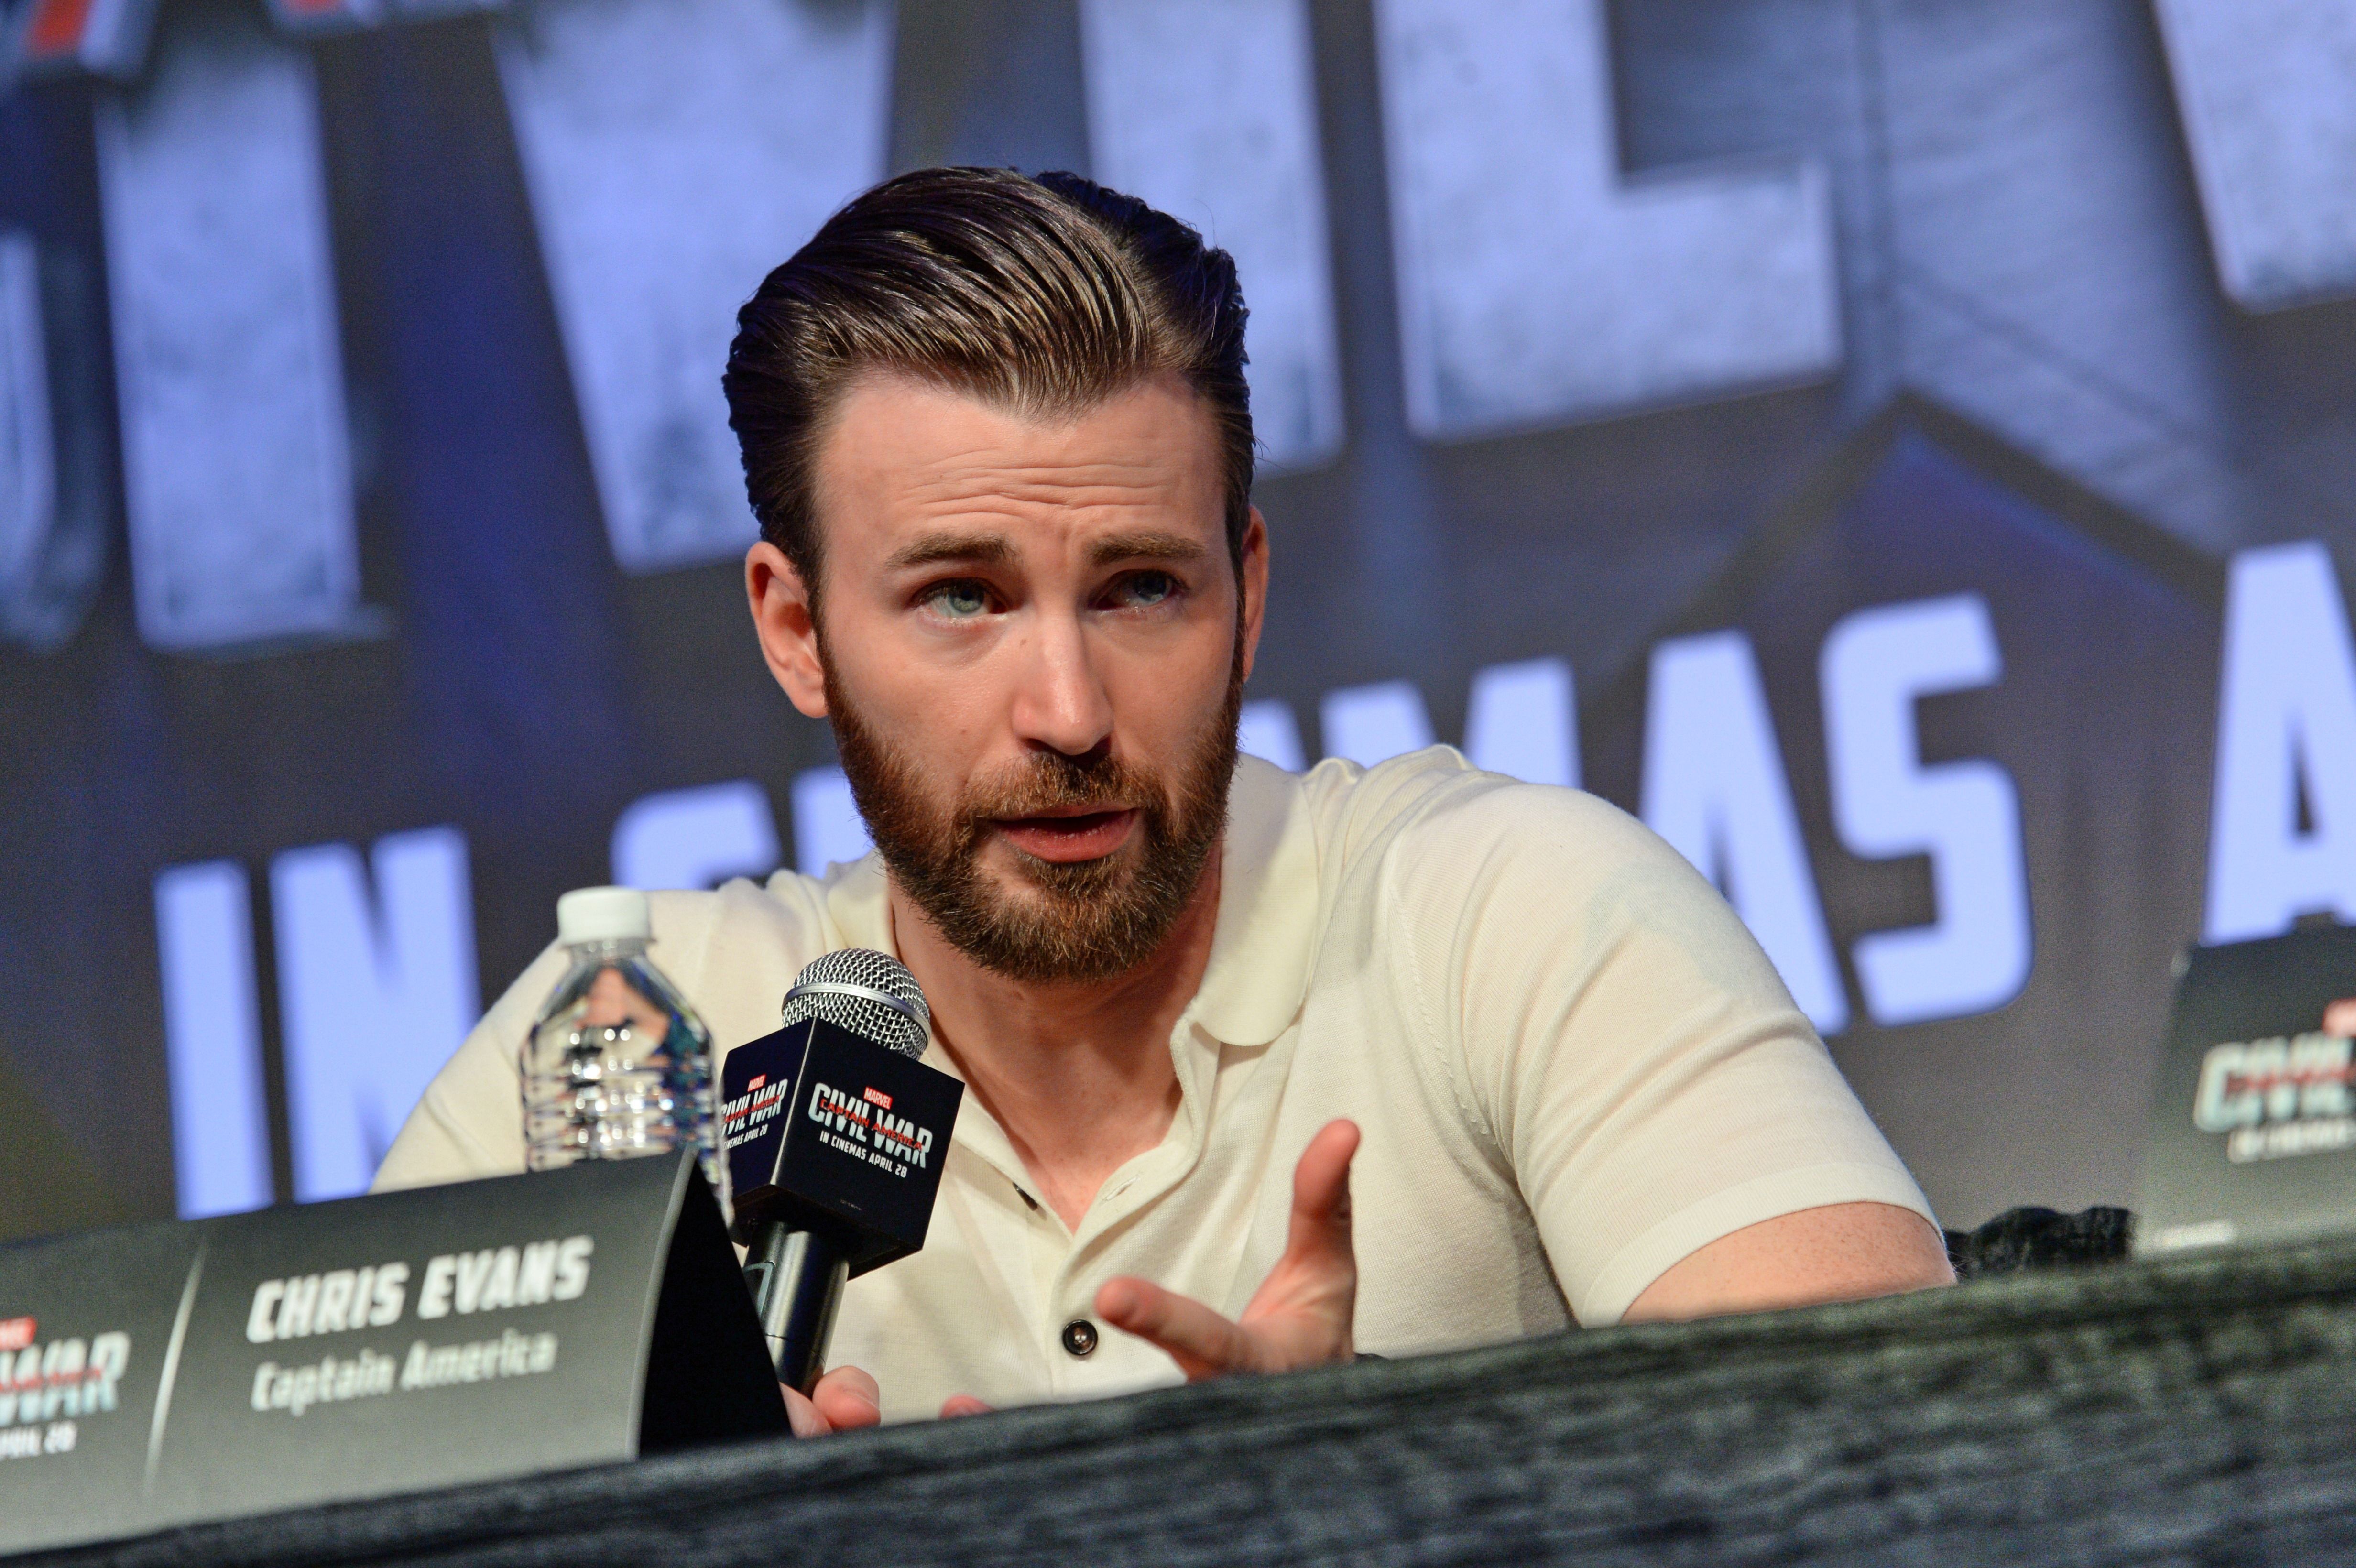 US actor Chris Evans attends a press conference at Marina Bay Sands